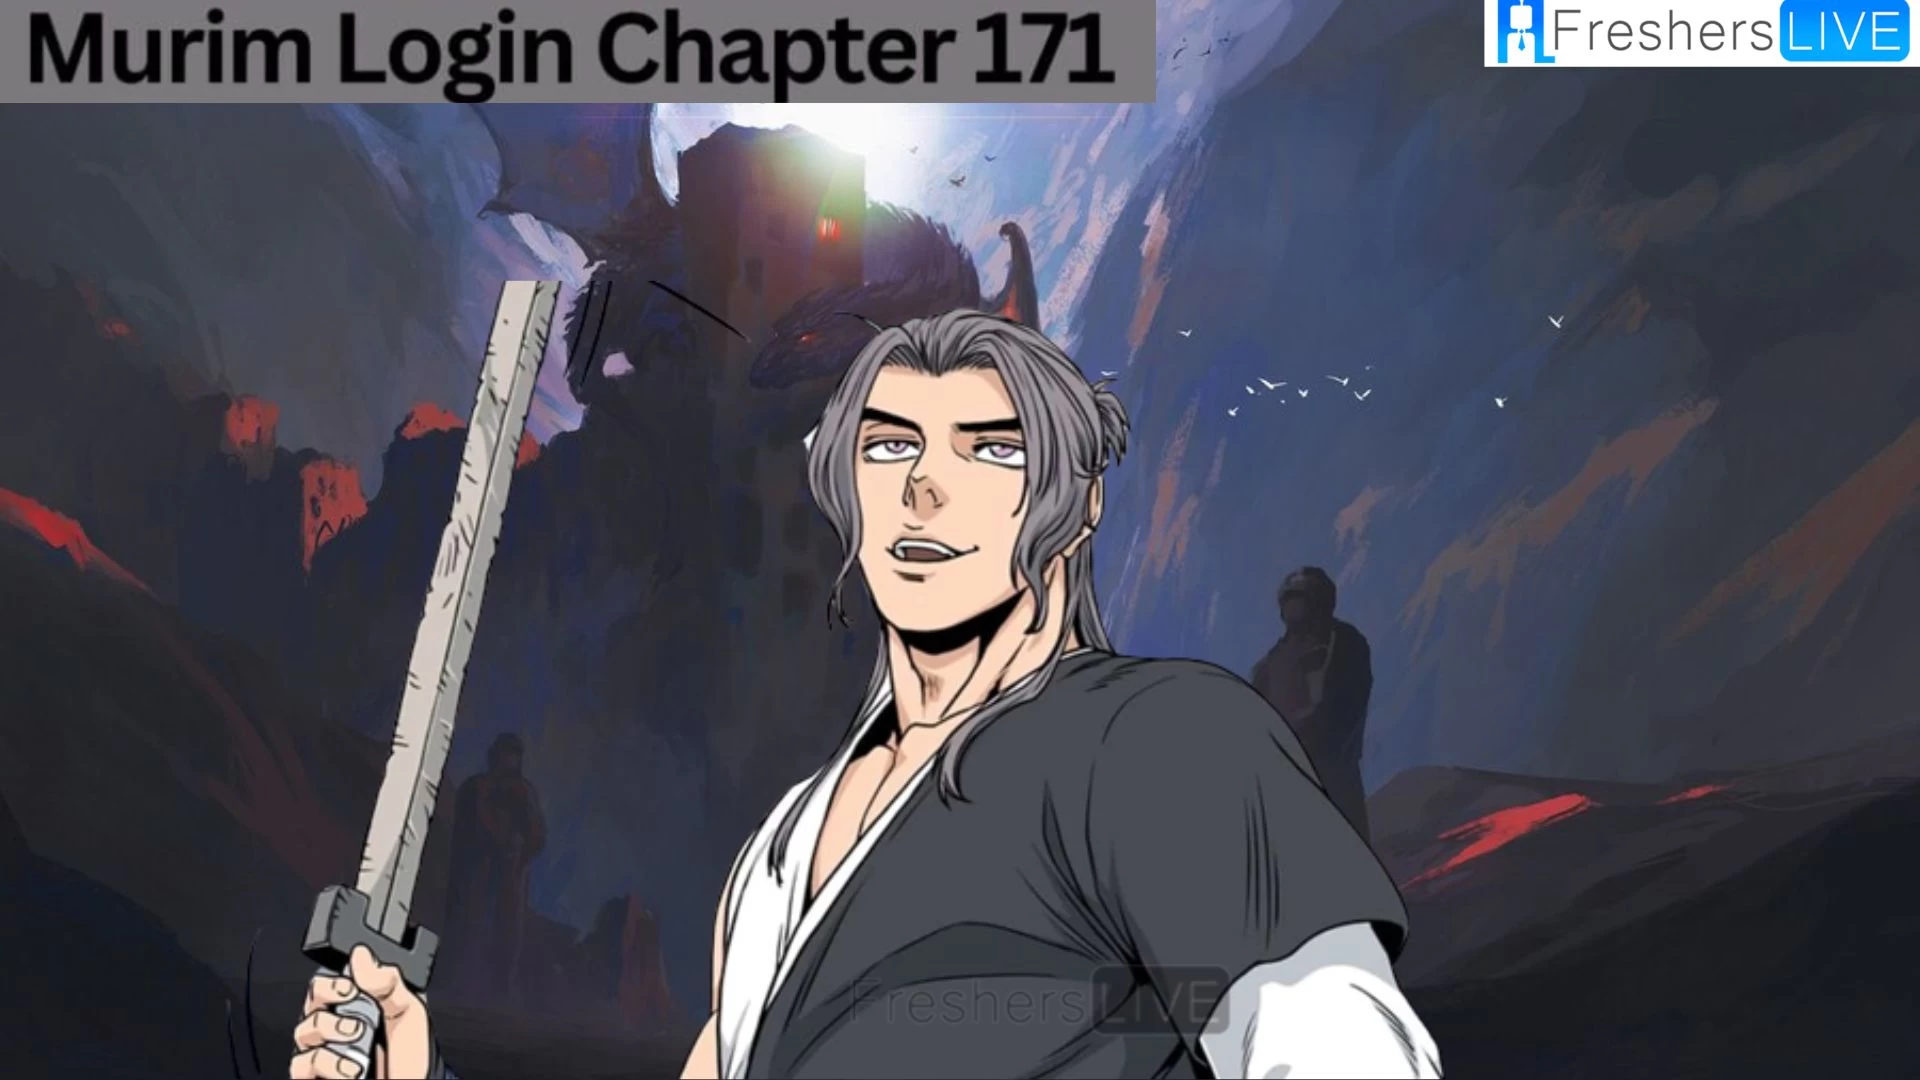 Murim Login Chapter 171 Release Date, Spoiler, Raw Scan, and Where to Read Murim Login Chapter 171?